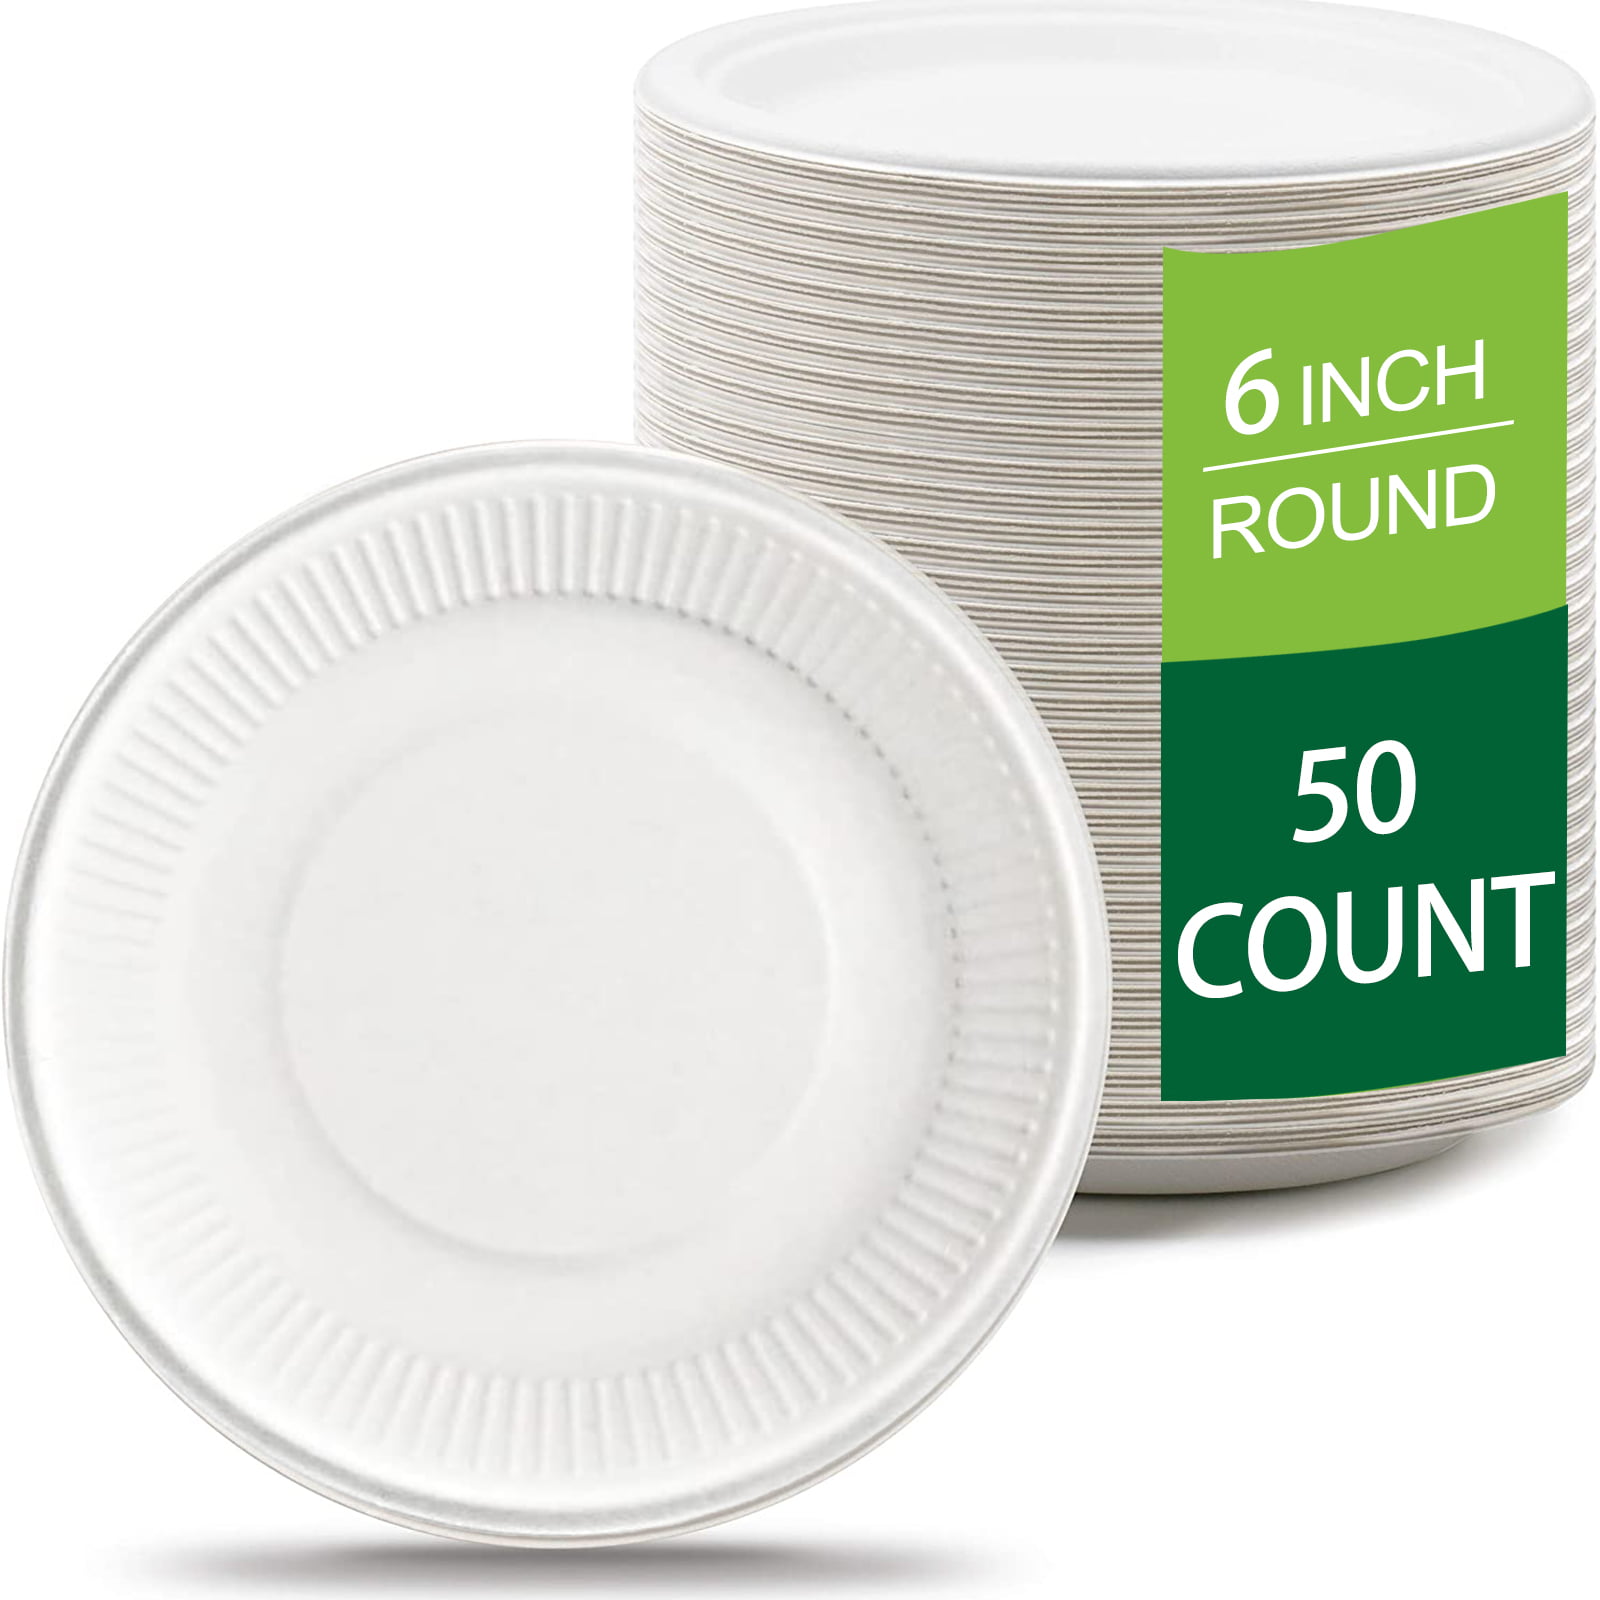 7 Inch -100 Pcs Super Rigid Paper Plates Extra Strength White Disposable Bagasse Plates Eco-Friendly Biodegradable and Compostable Perfect for Picnics BBQs and Parties